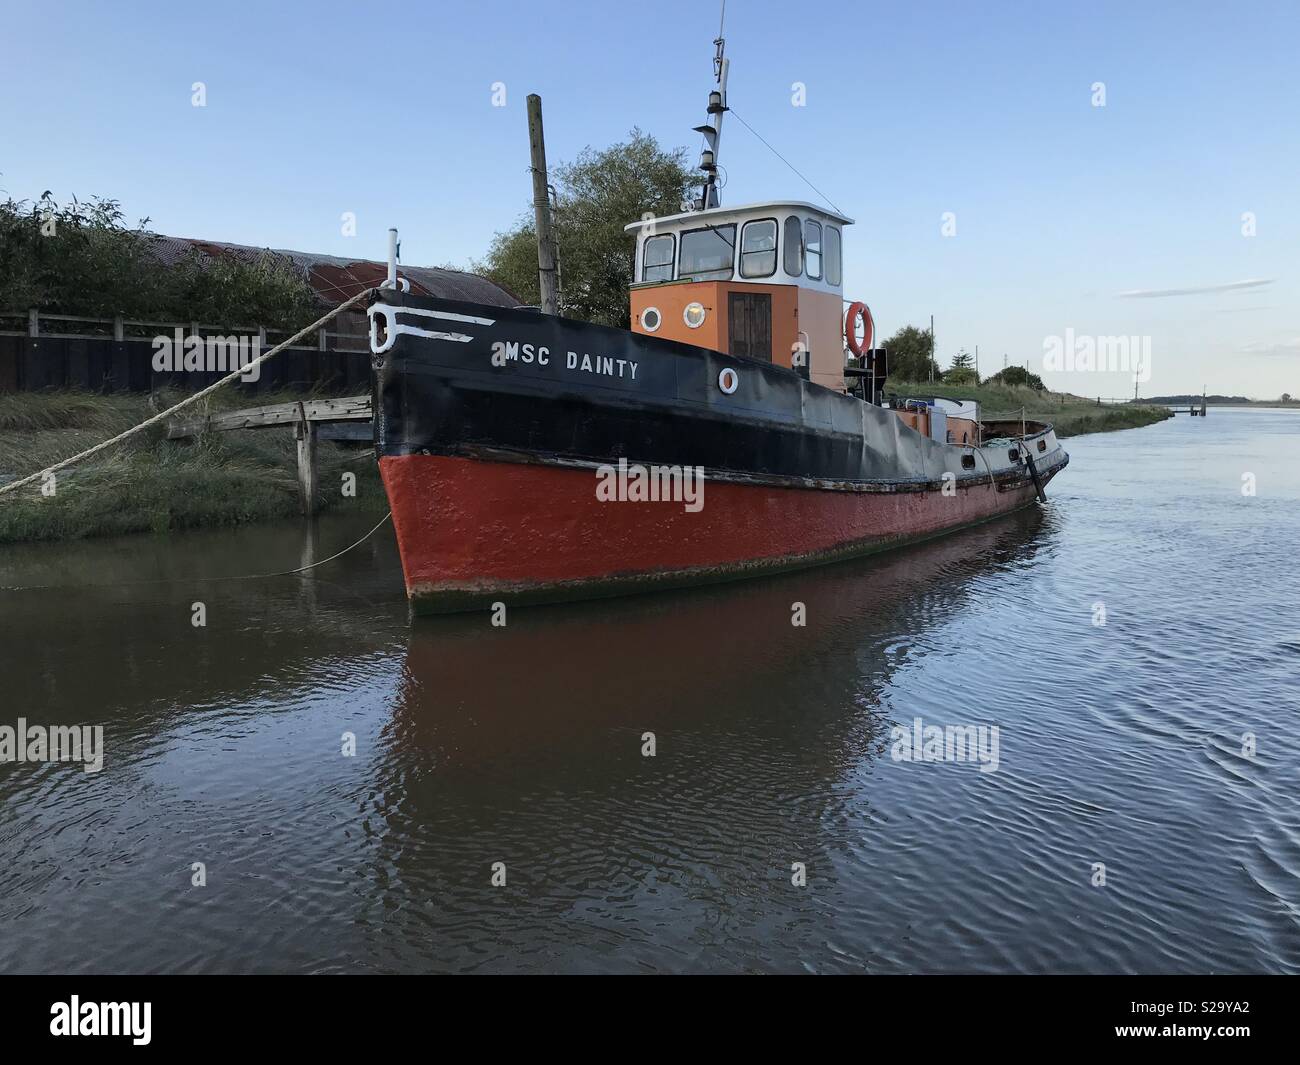 MSC DAINTY, United Kingdom, 37gt, completed Isaac Pimblott & Sons, Northwich, 1959. Former Manchester Canal tug boat. Pictured at Fosdyke Yacht Haven, Lincolnshire. Stock Photo